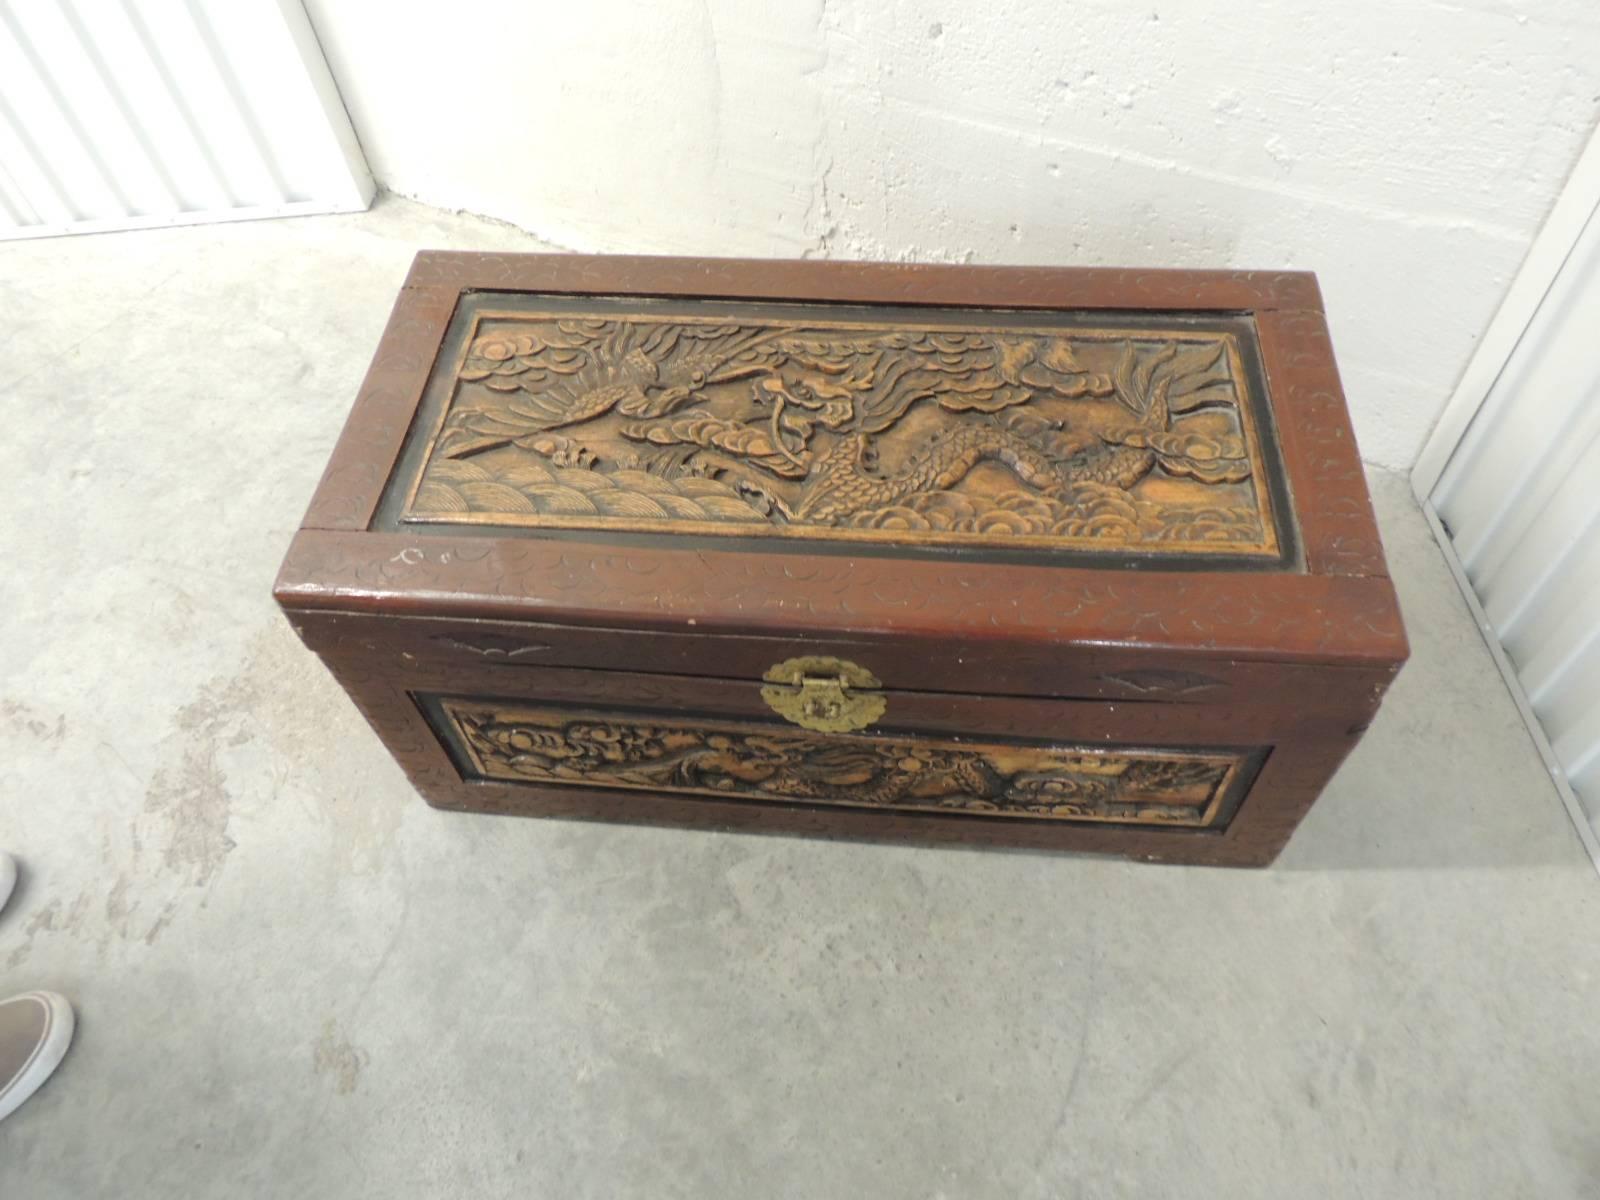 Vintage hand-carved Asian large cinnabar lacquered chest with cedar lined interior
Hand-carved vintage Asian large cinnabar lacquered chest with cedar lined interior. Carving Asian motif with dragons and cranes. hand-carved in all five sides.